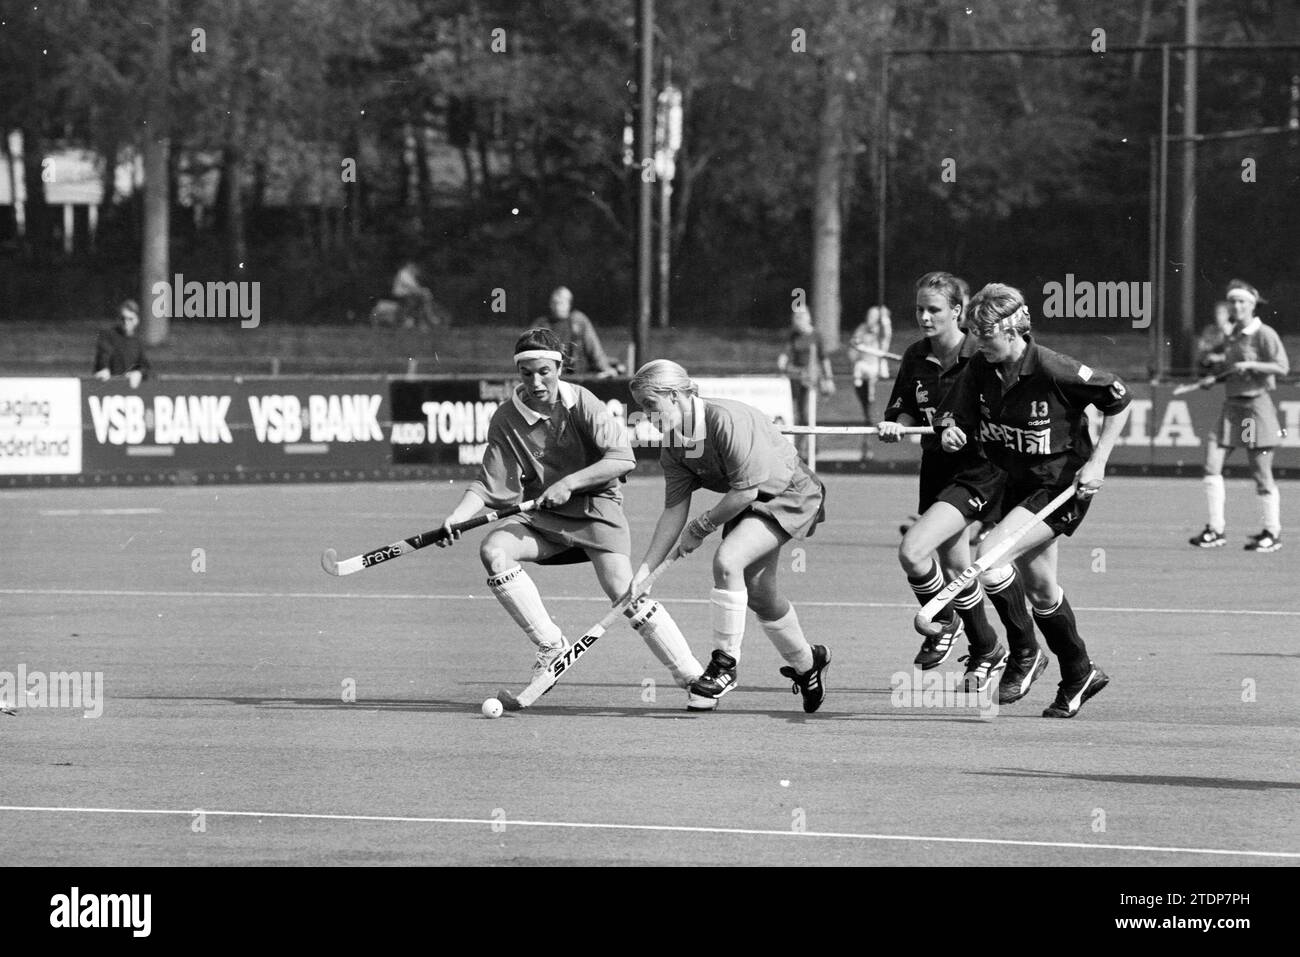 Hockey, Bloemendaal - HGC, 24-09-1994, Whizgle News from the Past, Tailored for the Future. Explore historical narratives, Dutch The Netherlands agency image with a modern perspective, bridging the gap between yesterday's events and tomorrow's insights. A timeless journey shaping the stories that shape our future Stock Photo